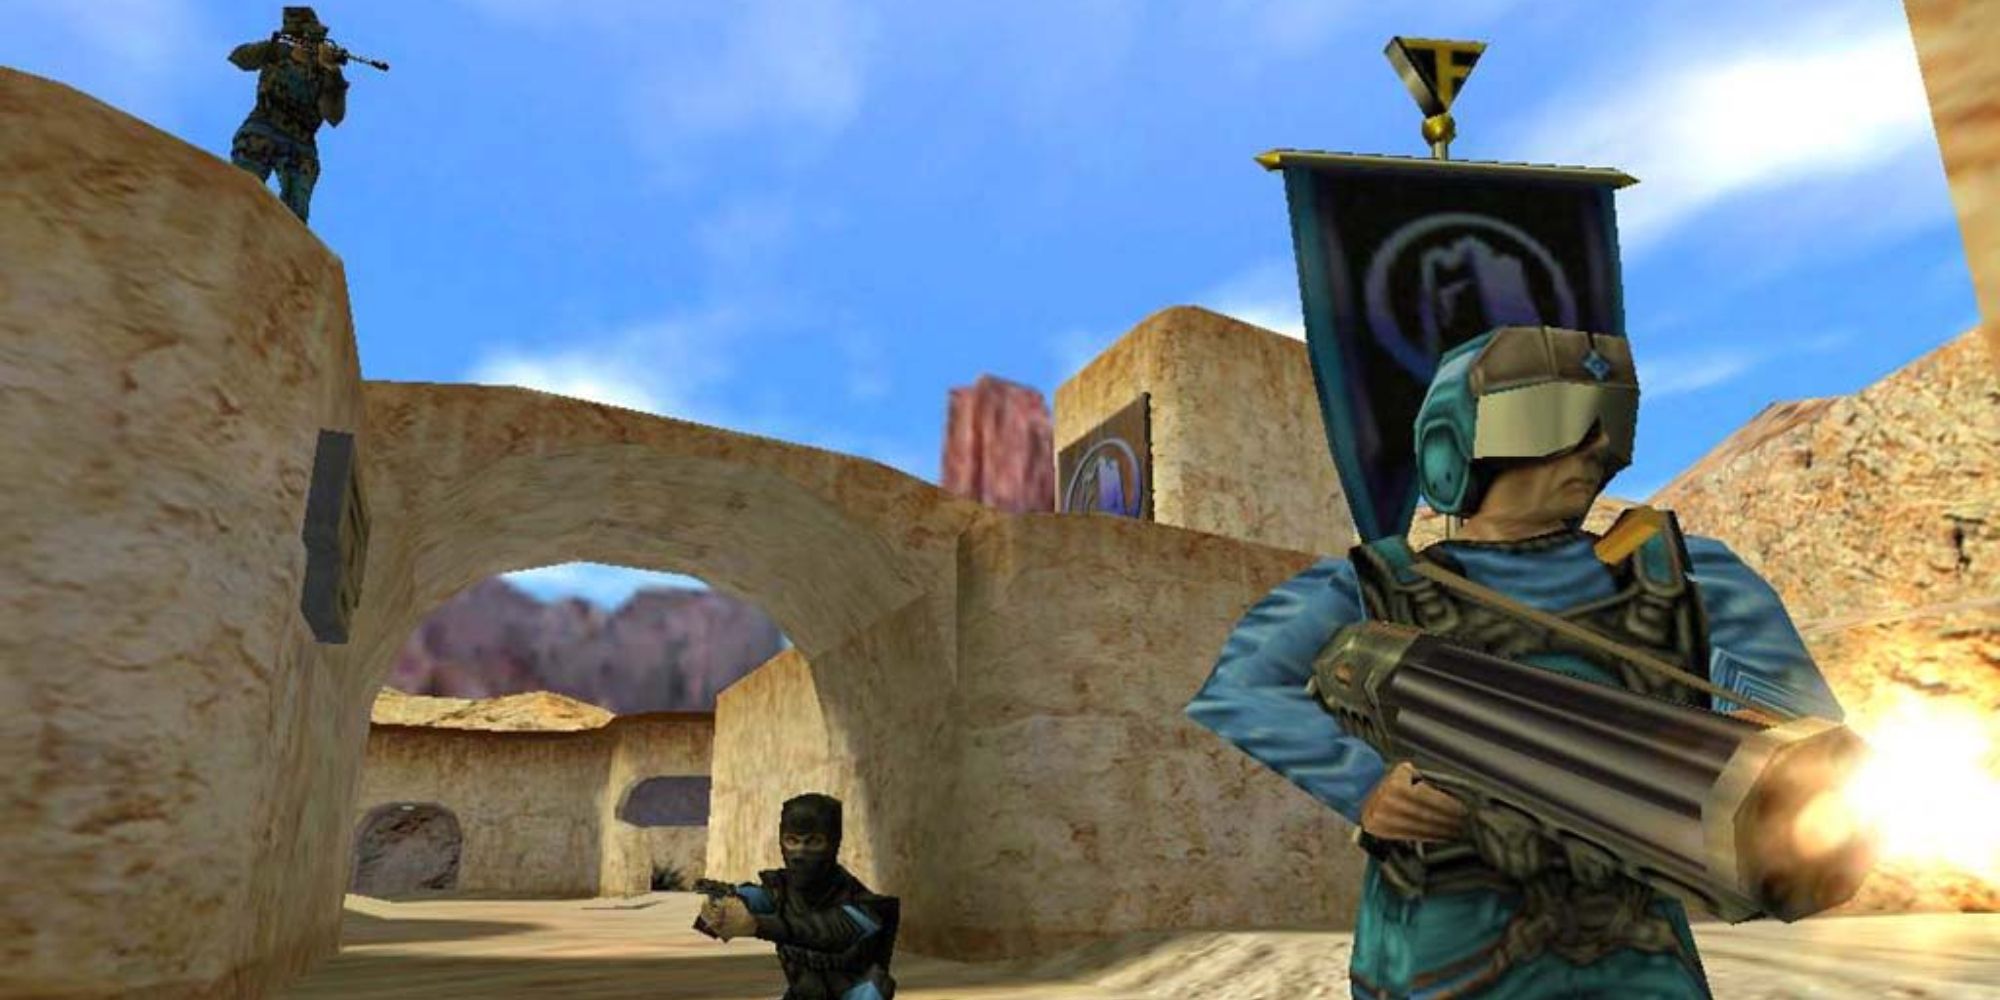 90s FPS a wide shot from Team Fortress Classic of the Soldier, Spy and Sniper stood in various positions throughout a sand covered village in the desert with a blue flag in the top right